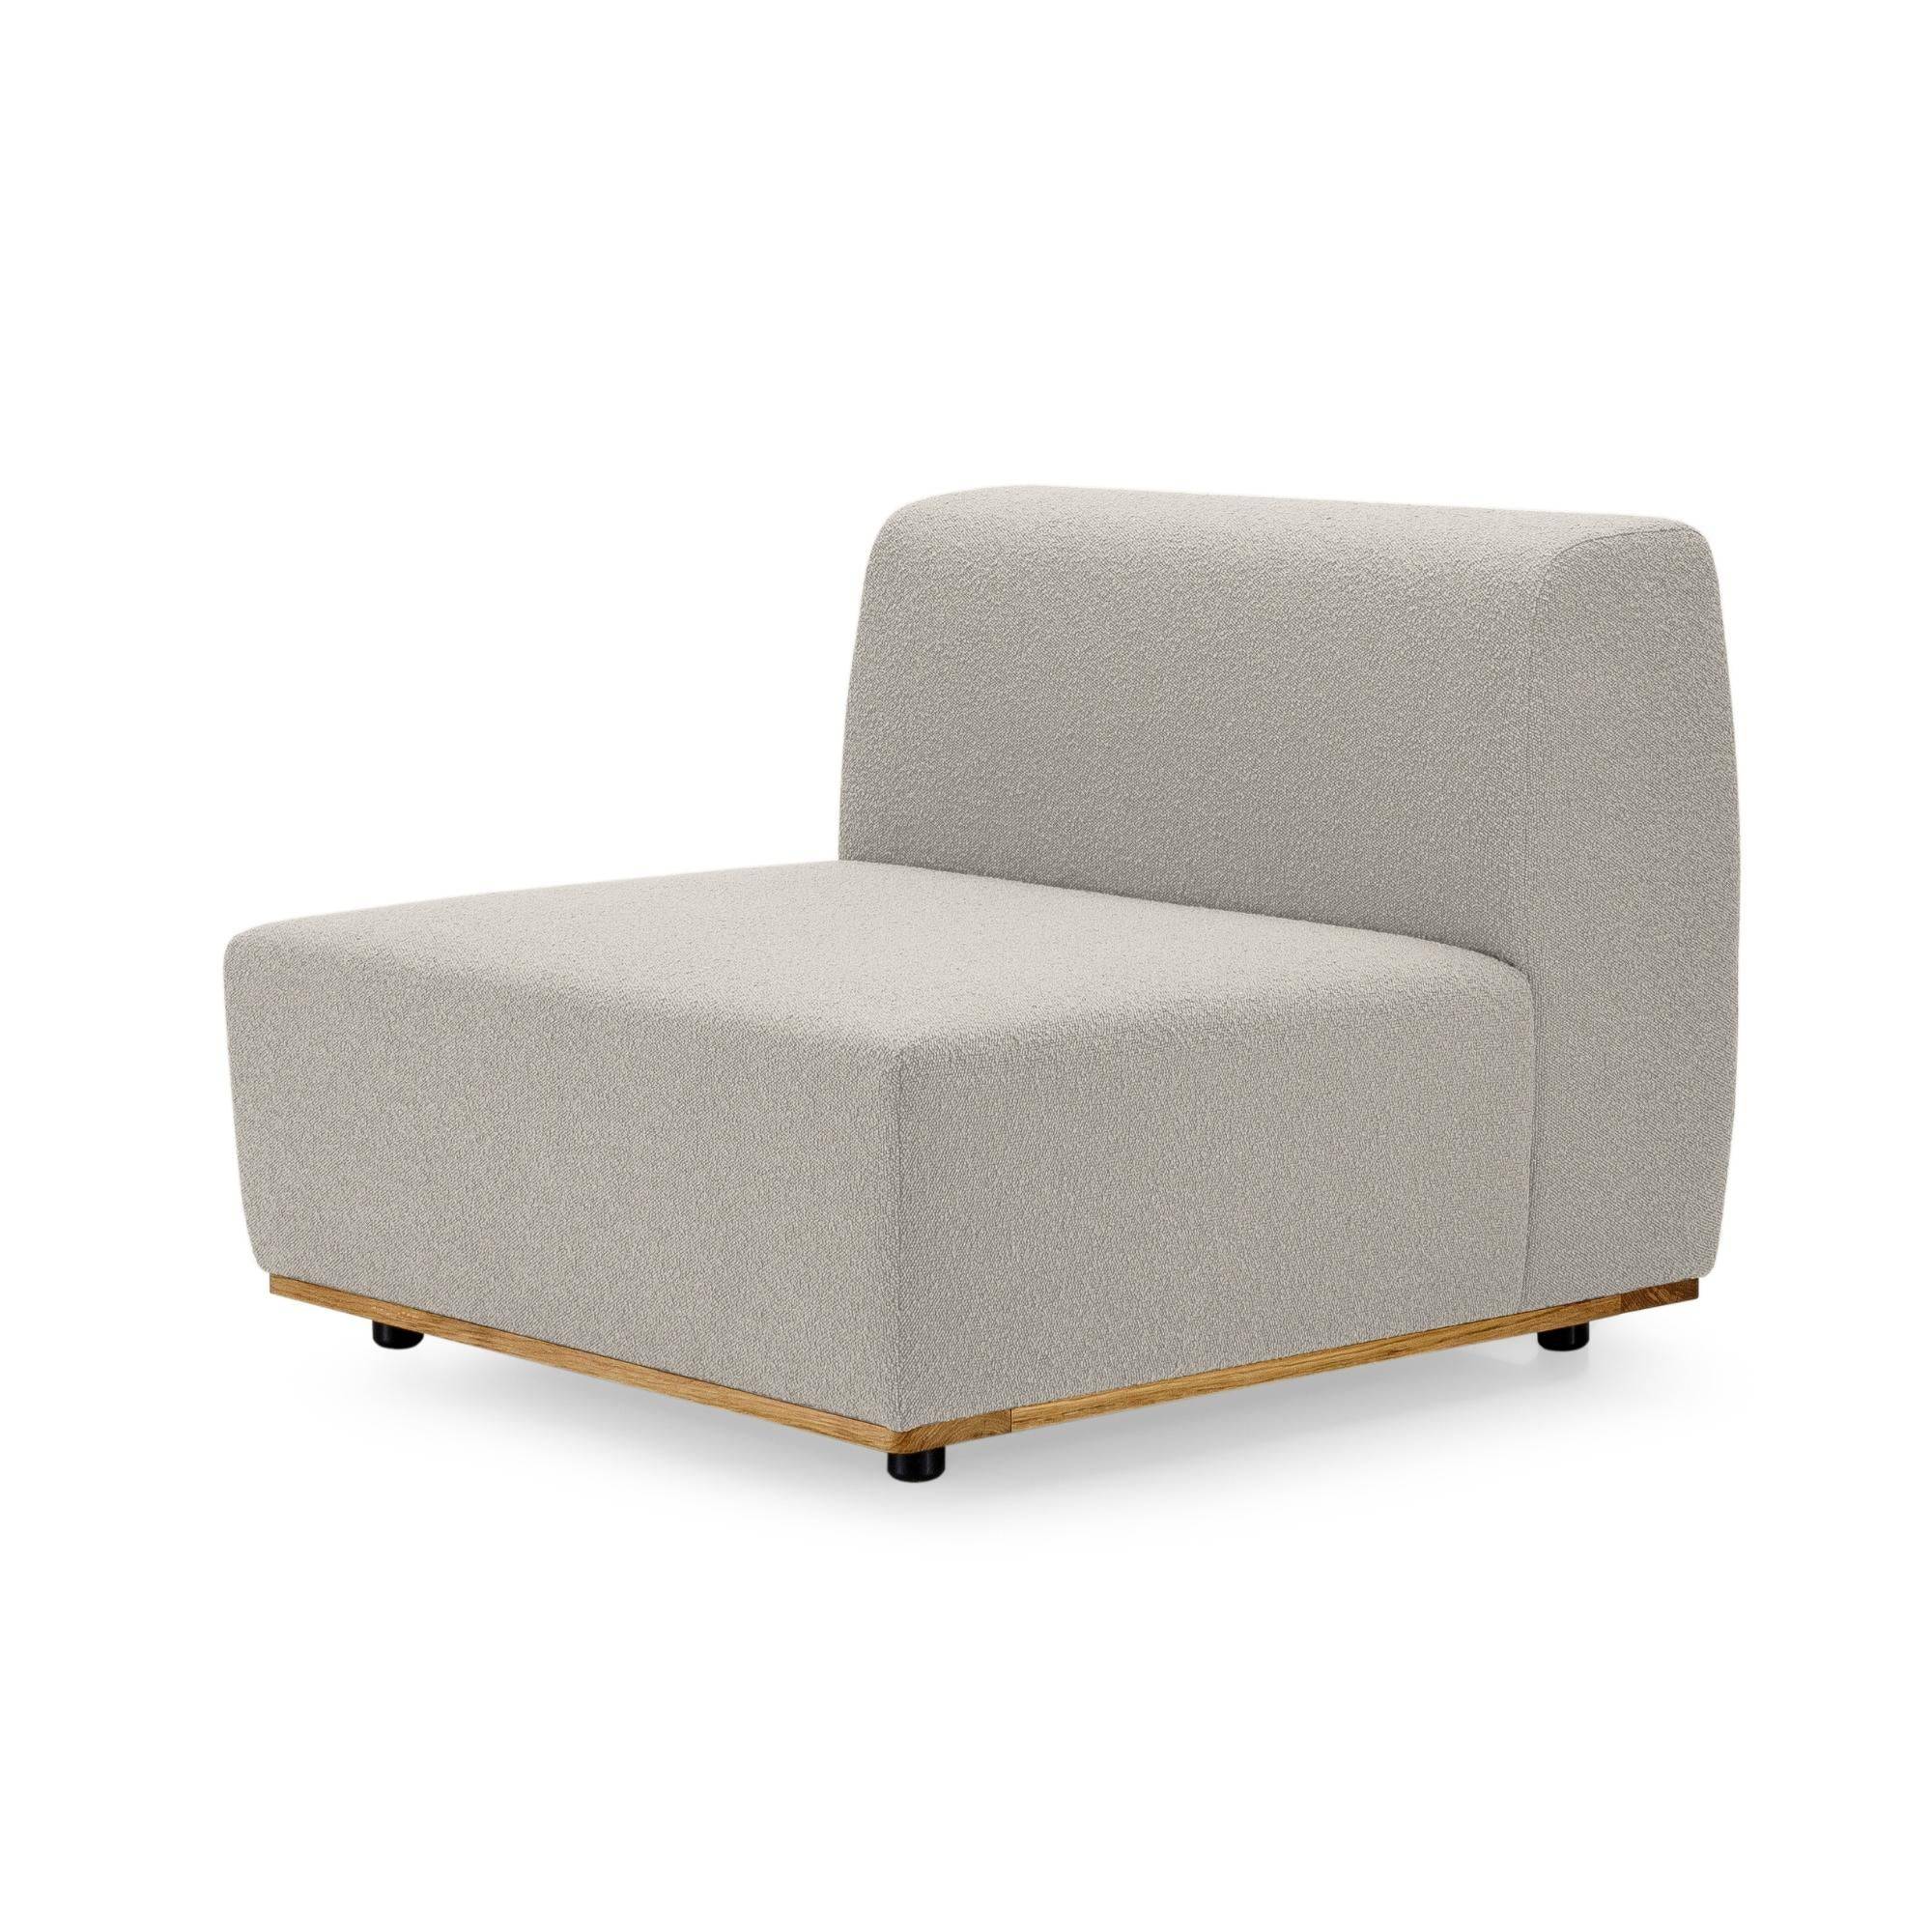 Saler Lounge Chair, Symphony Mills - Beige - THAT COOL LIVING